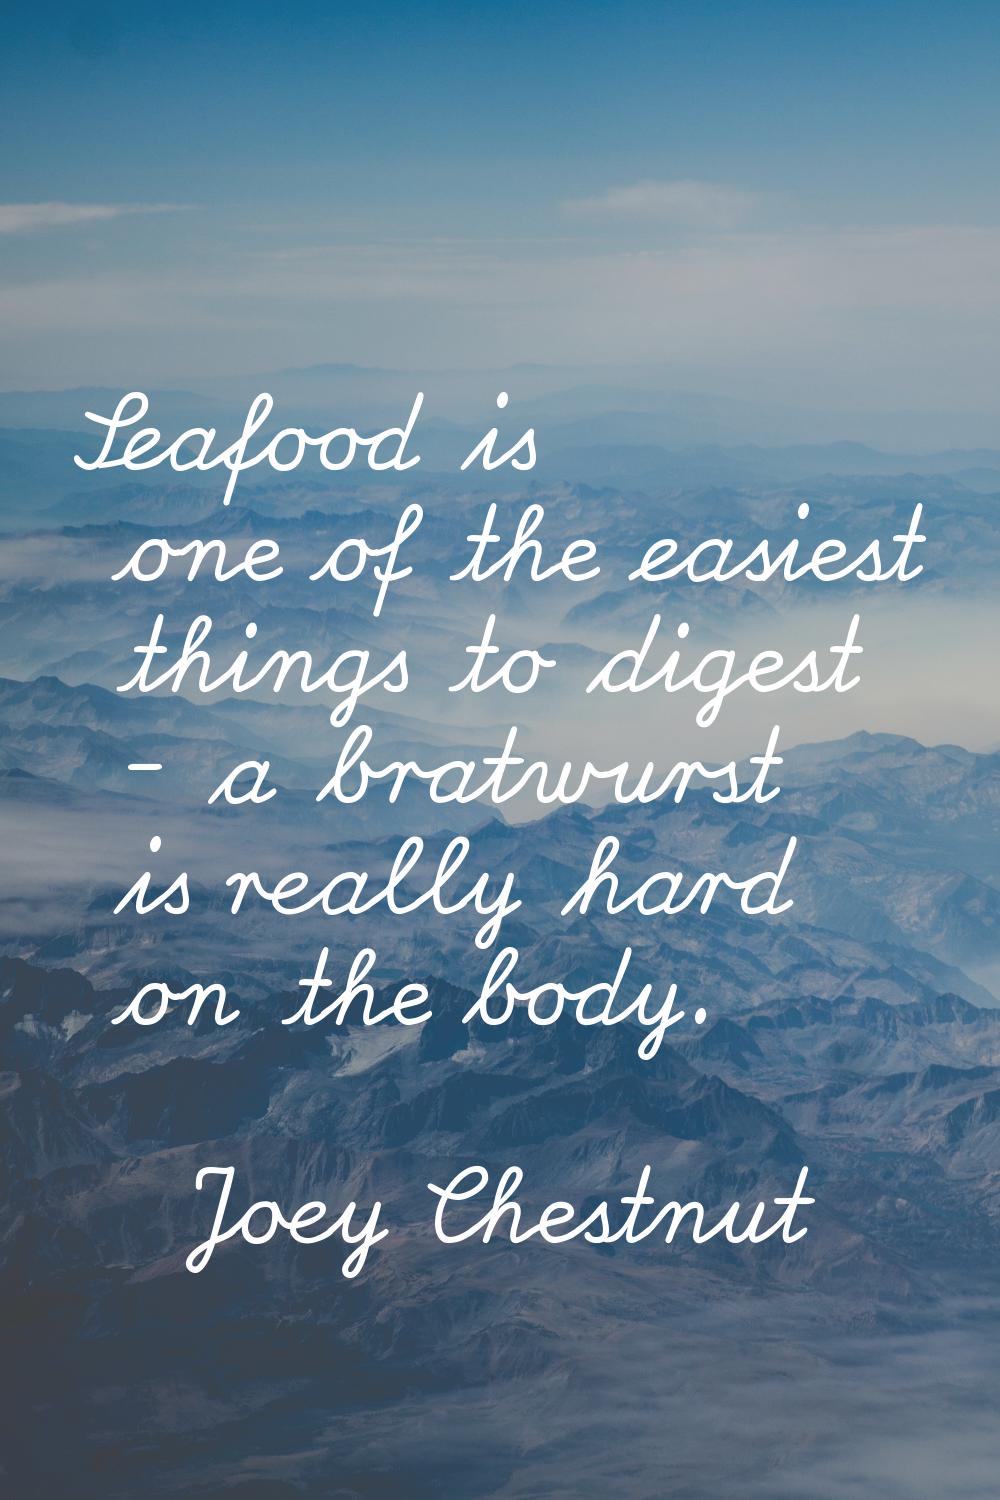 Seafood is one of the easiest things to digest - a bratwurst is really hard on the body.